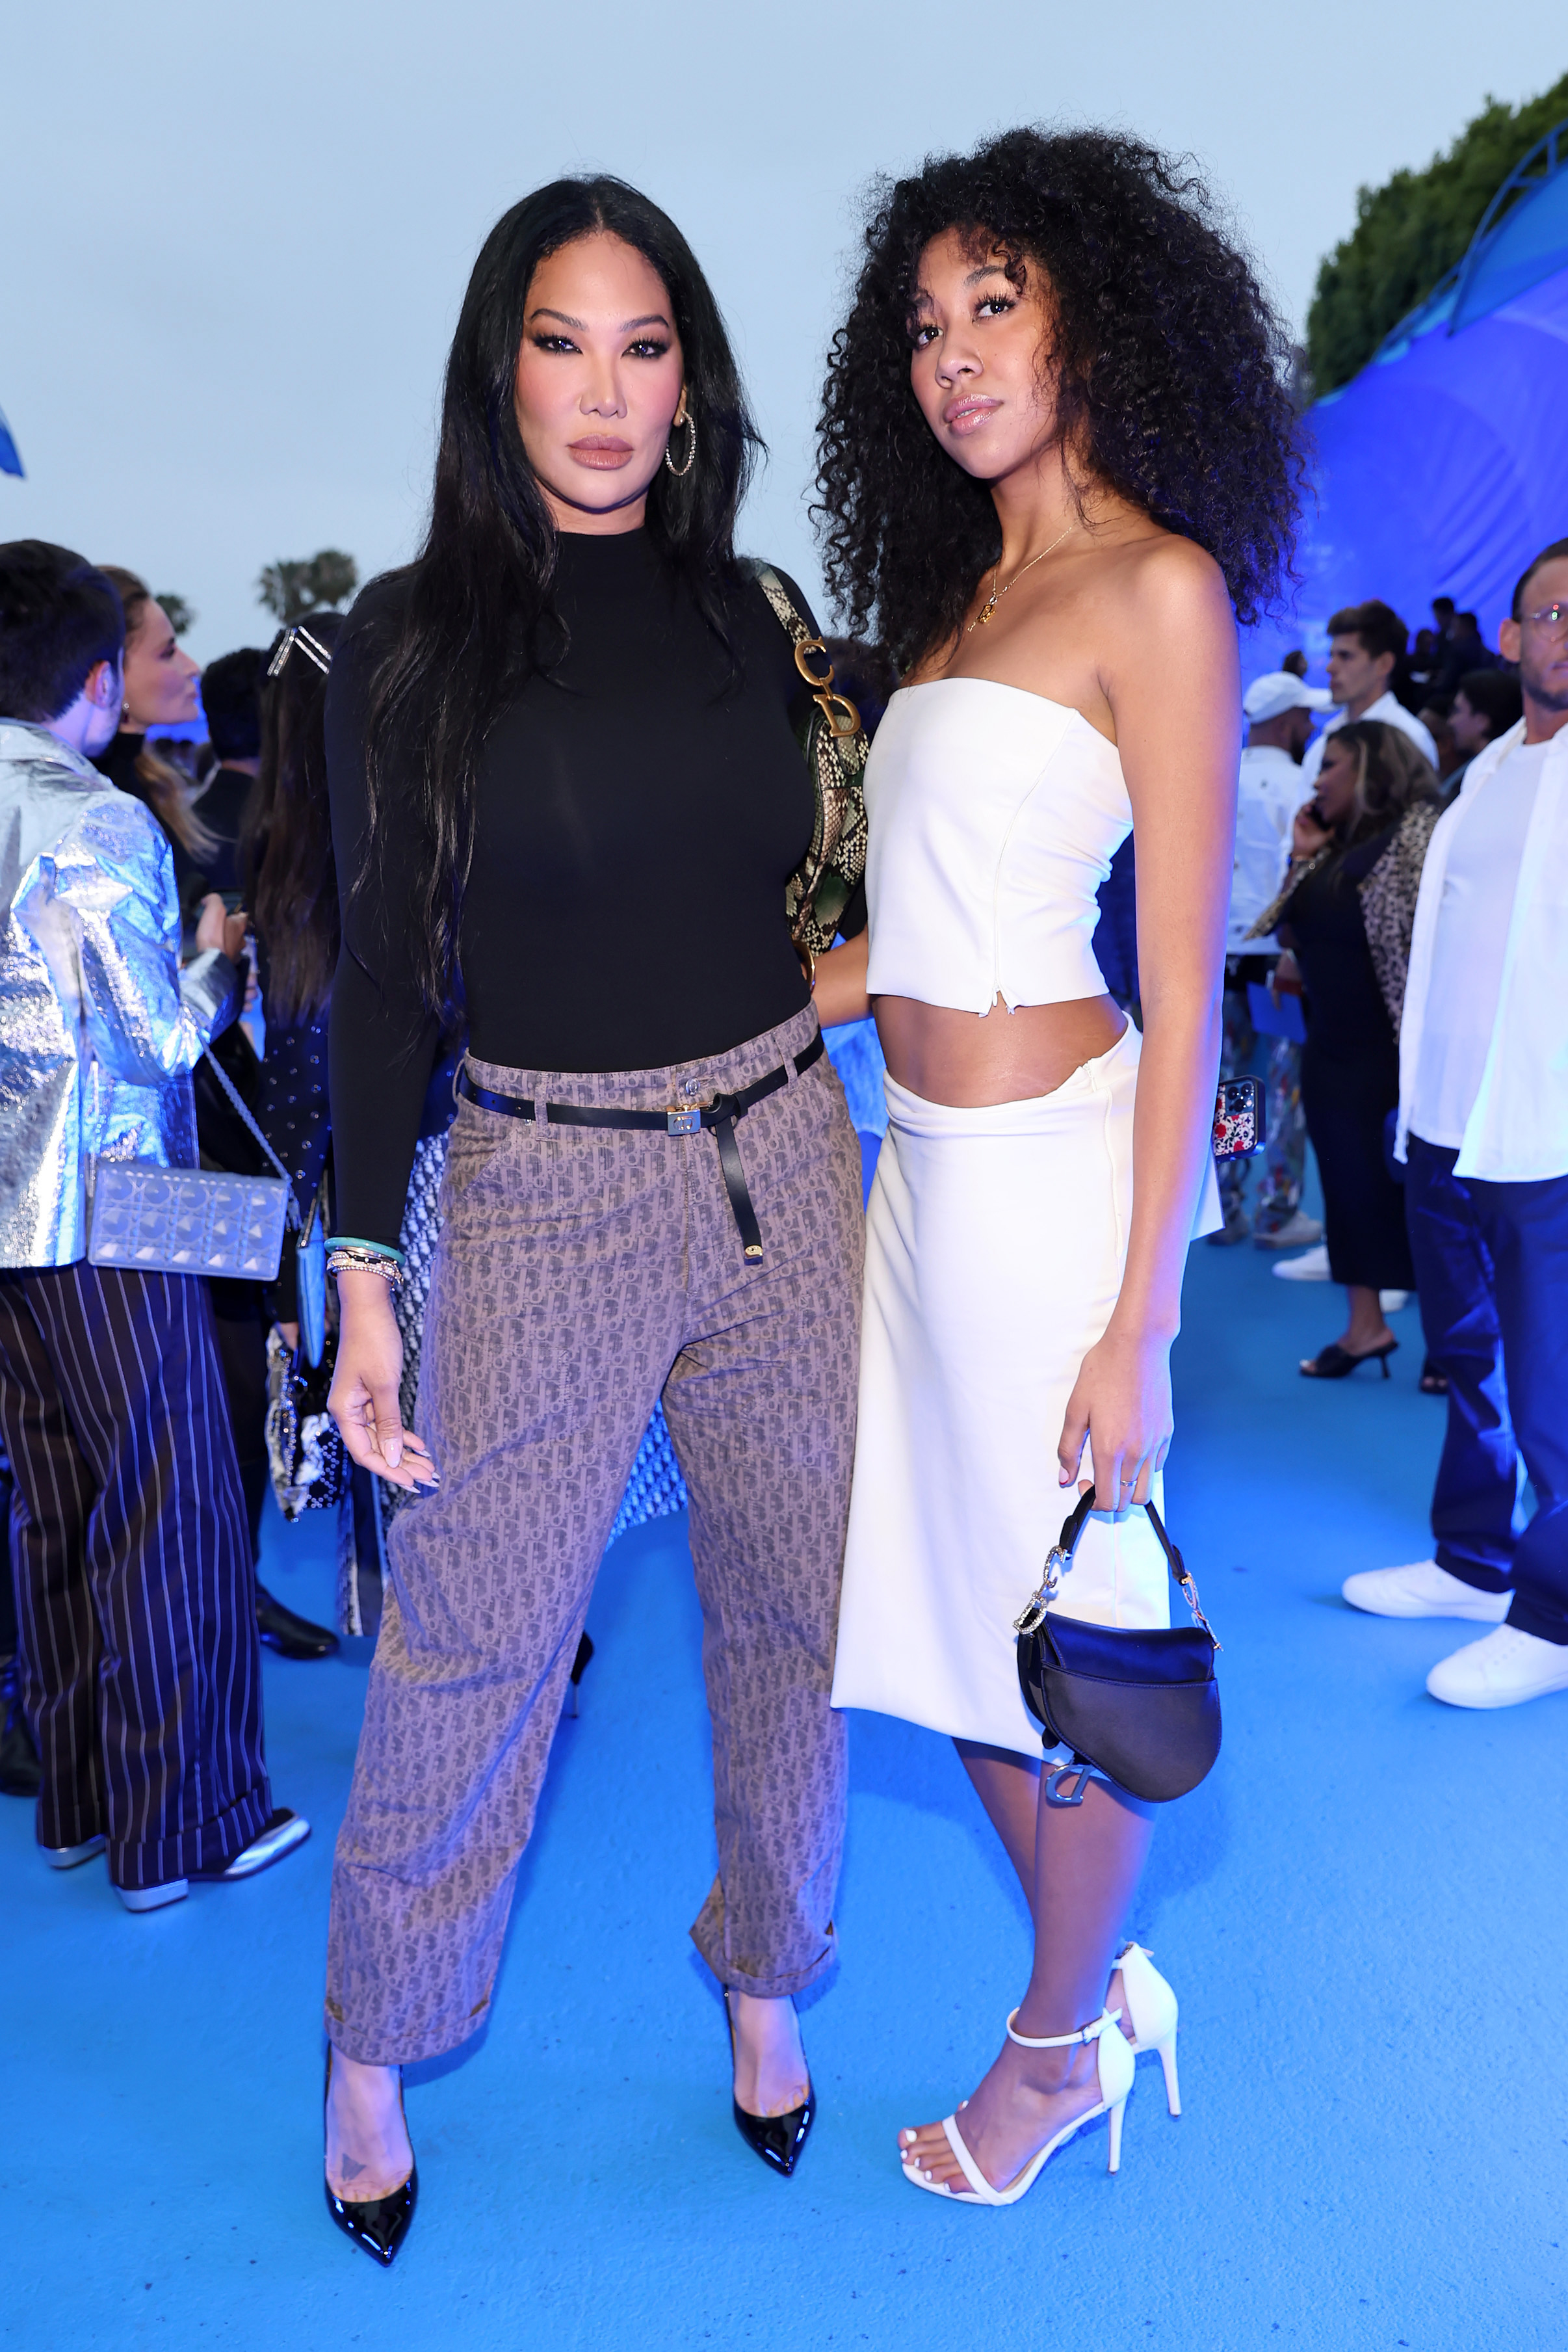 Kimora and Aoki posing for the cameras at an event